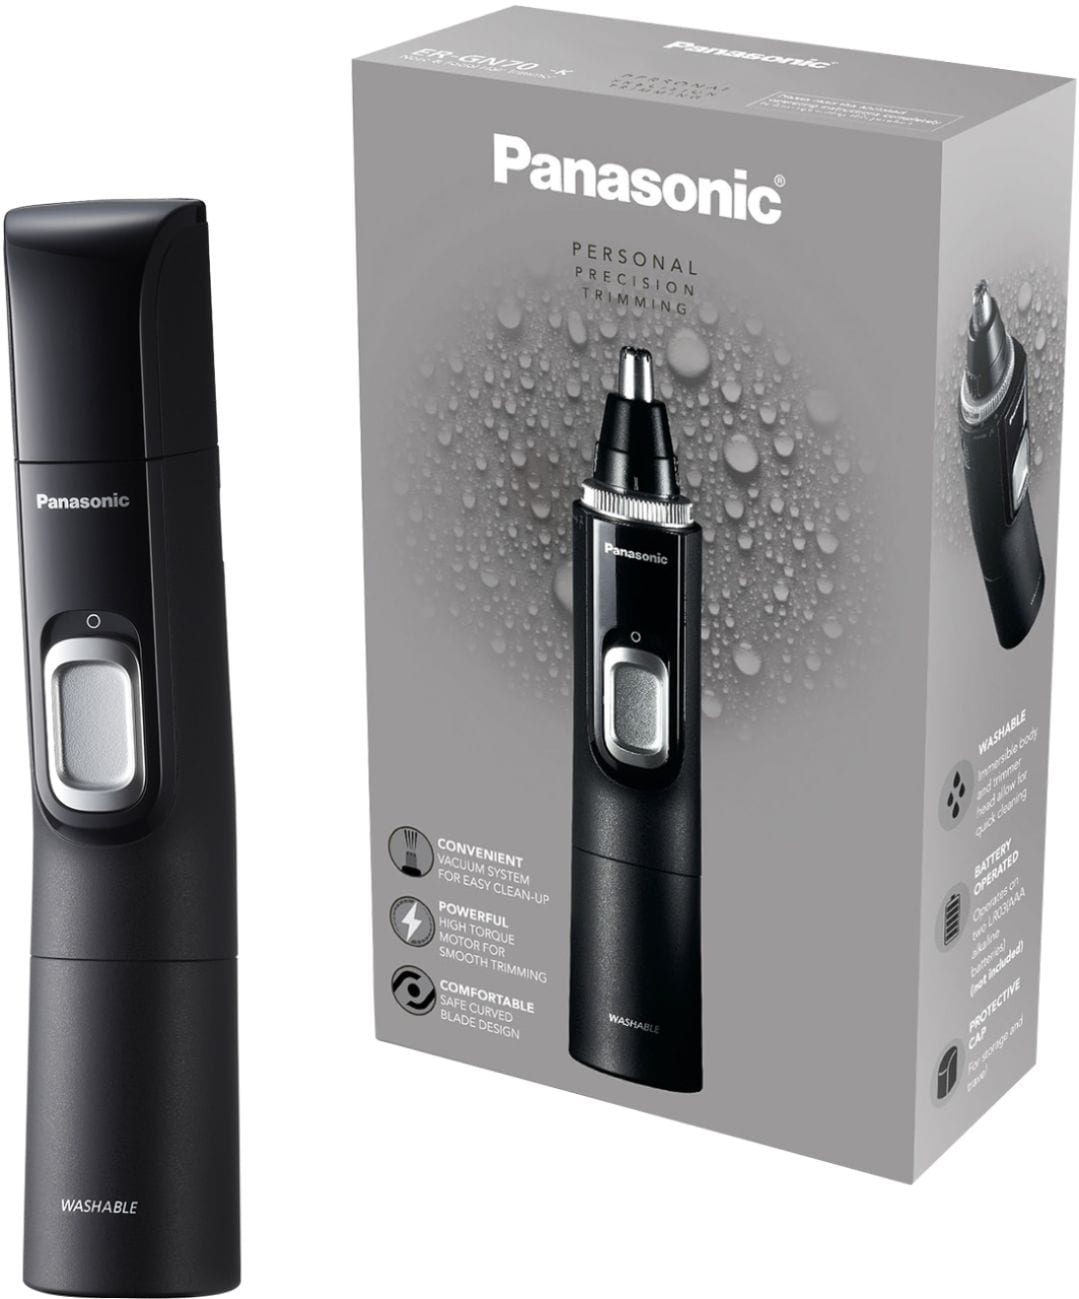 Panasonic - Men's Ear and Nose Hair Trimmer with Vacuum Cleaning System - Wet/Dry - Black/Silver_2